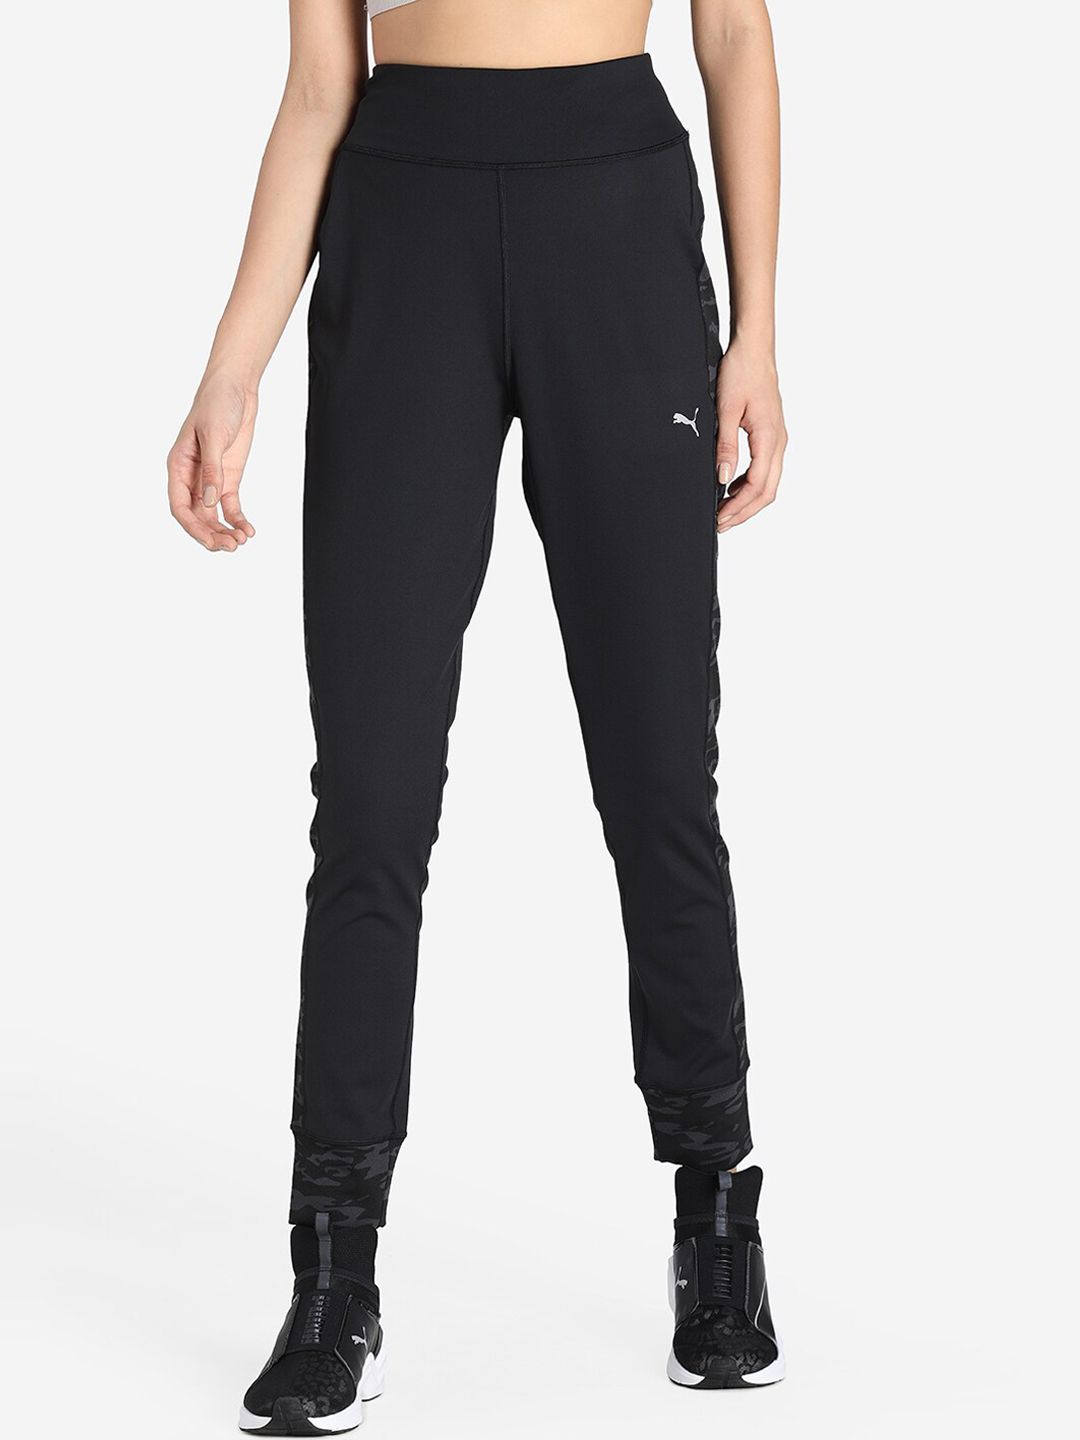 Puma Women Black Solid Running Joggers Price in India